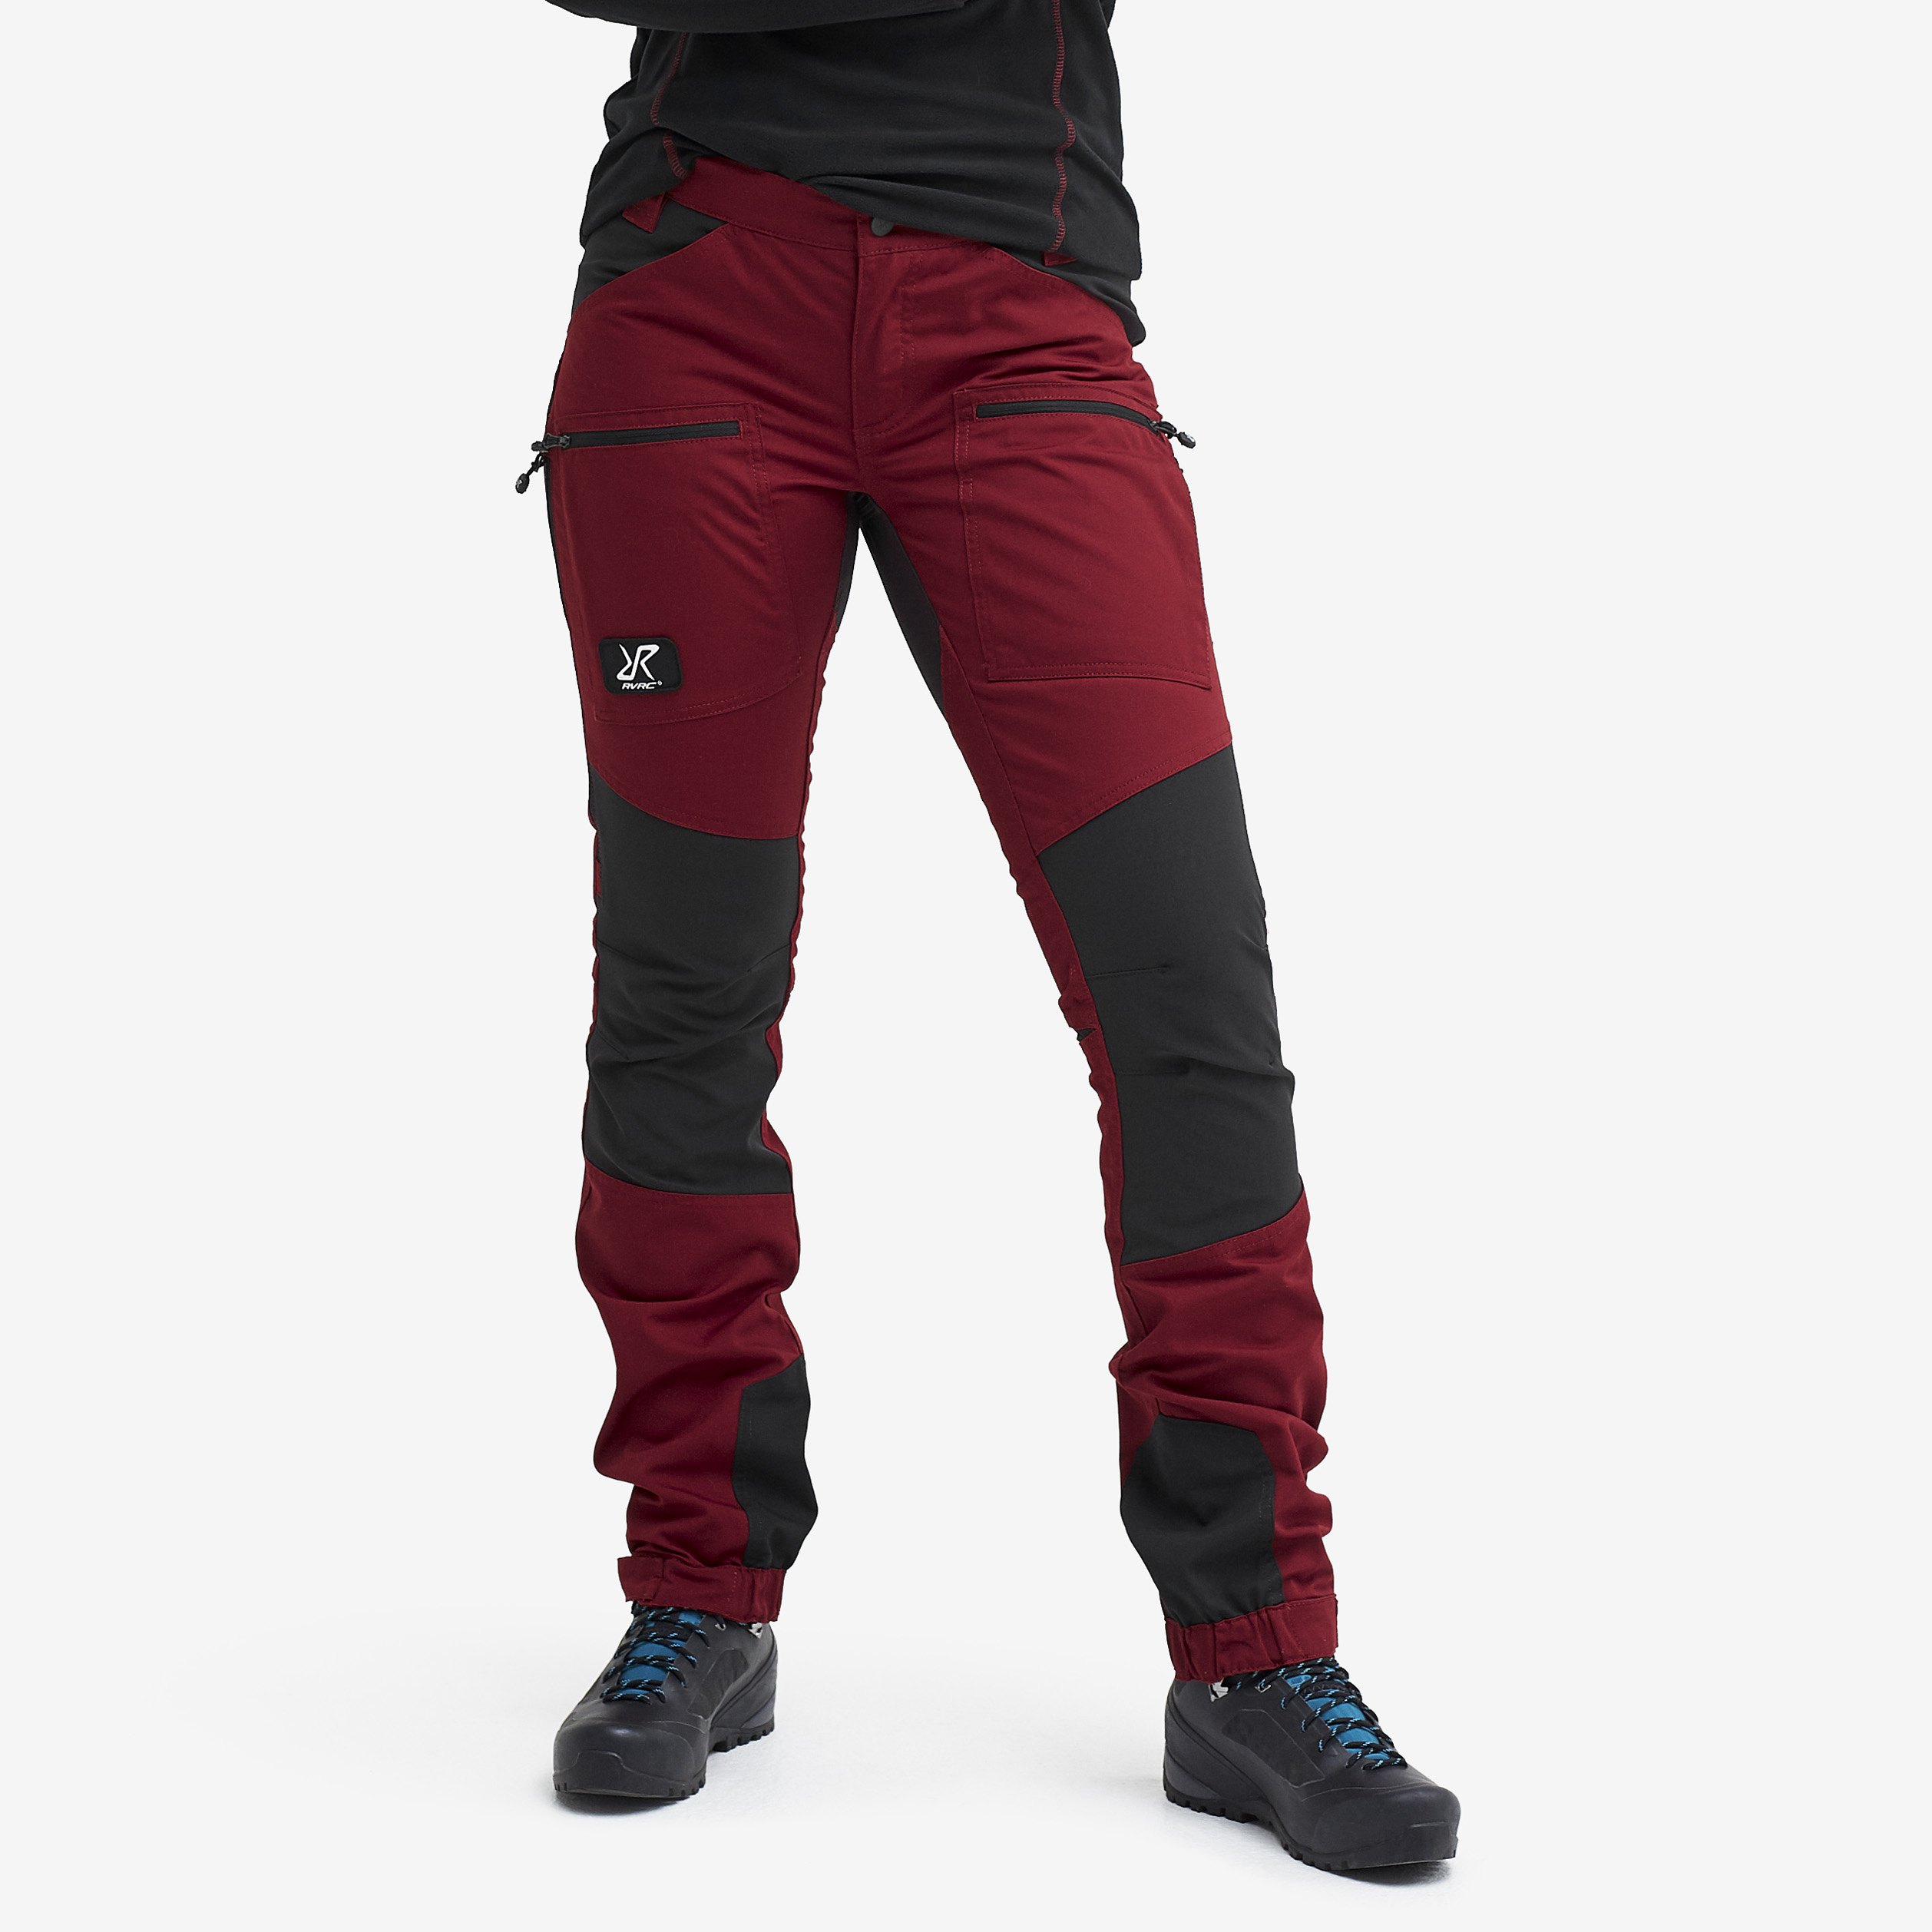 Nordwand Pro Pants Wine Red Femme